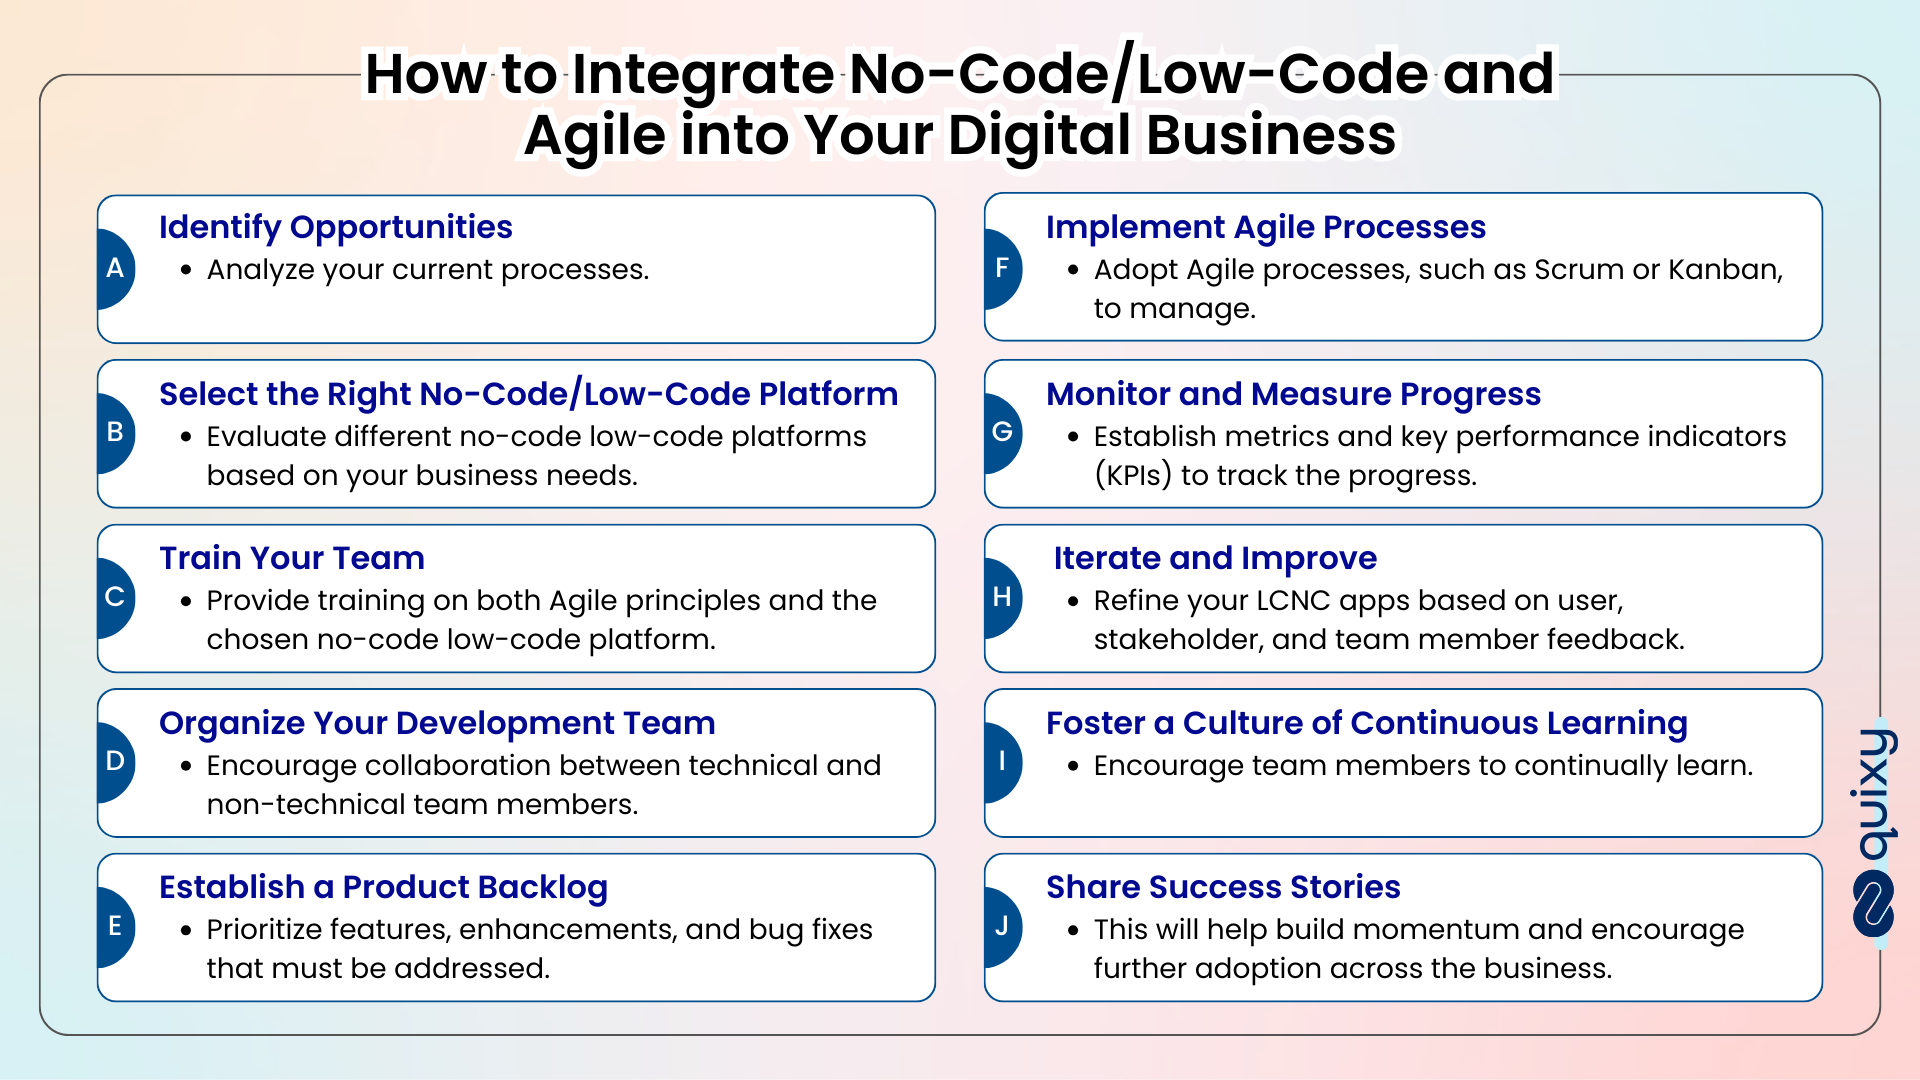 Integrating No-Code Low-Code and Agile